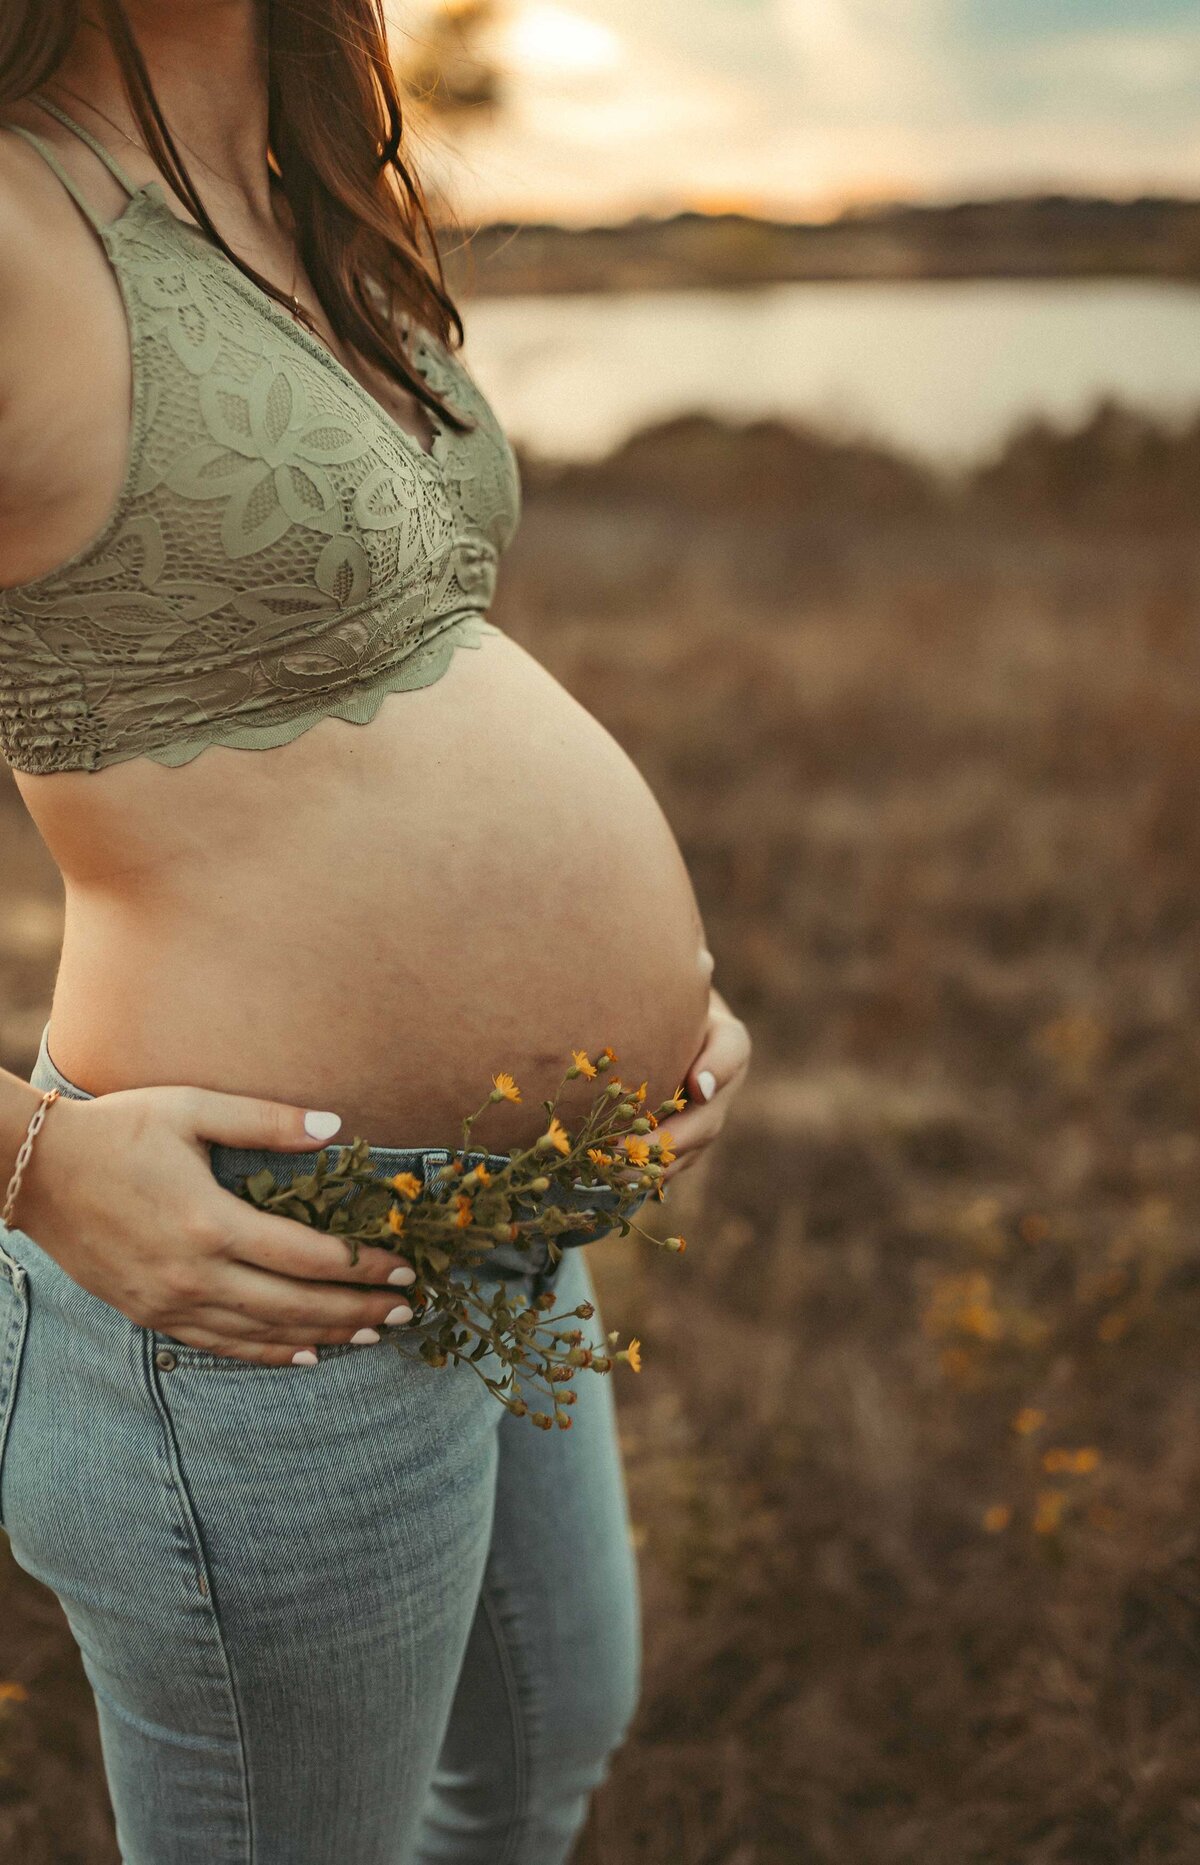 Woman on a maternity session weariing jeans and a lace bralette. She is holding a bunch of small yellow flowers in her hand.